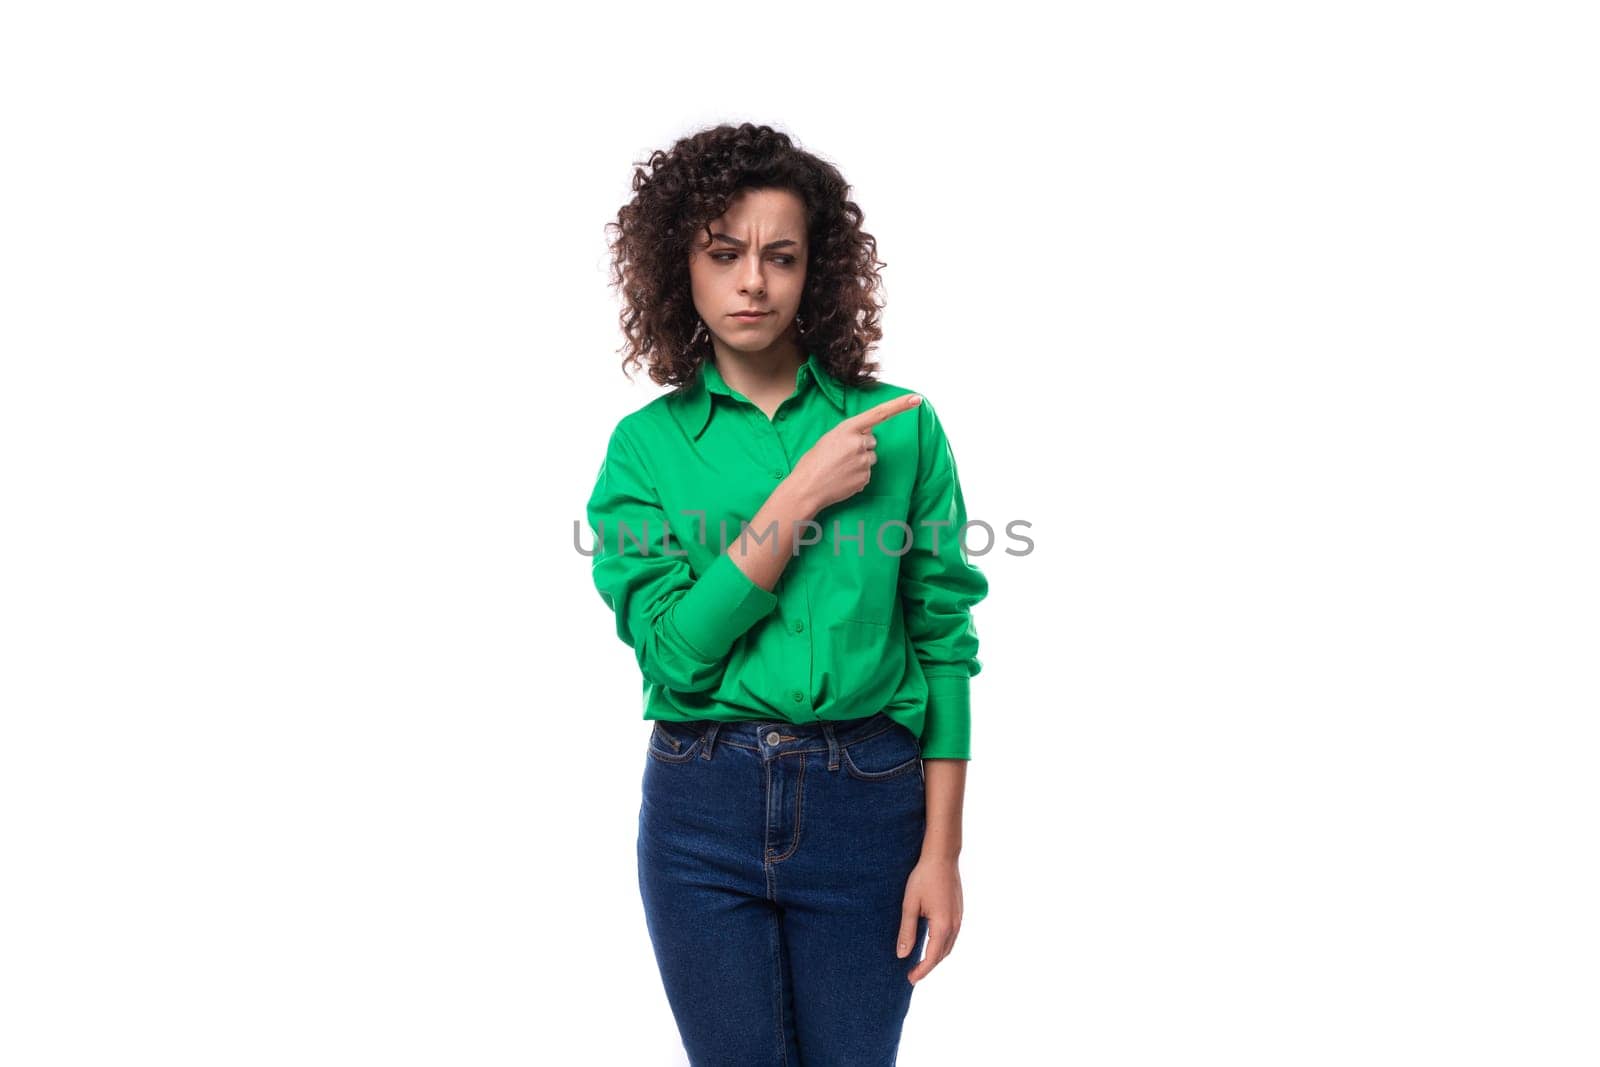 young caucasian brunette woman with curled hair dressed in a green shirt points her finger towards copy space. advertising concept.